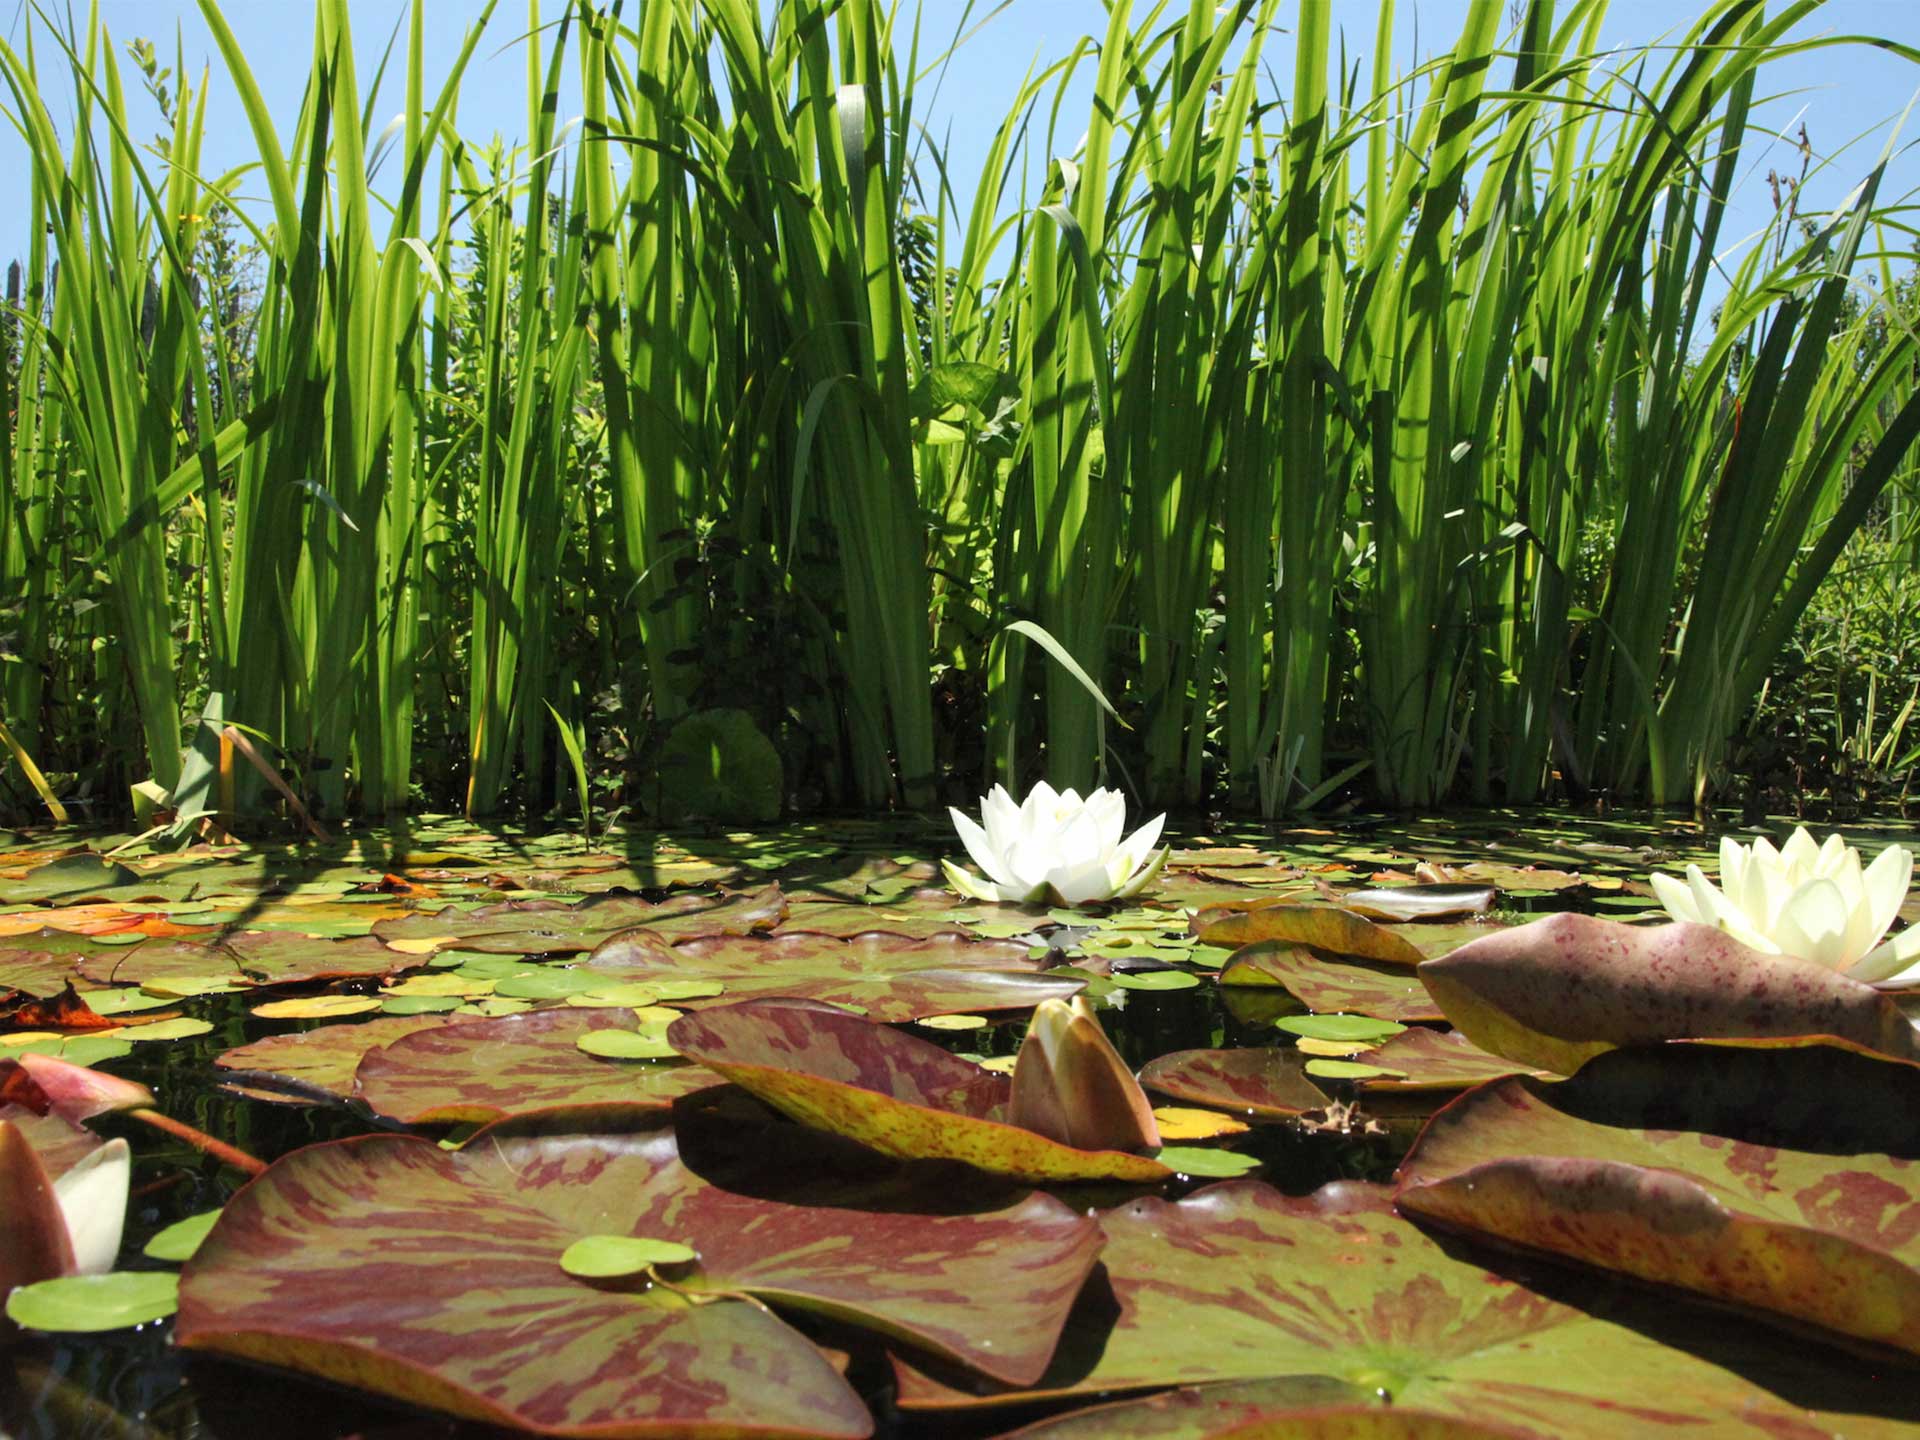 Swim amongst lily pads and rushes in your own garden